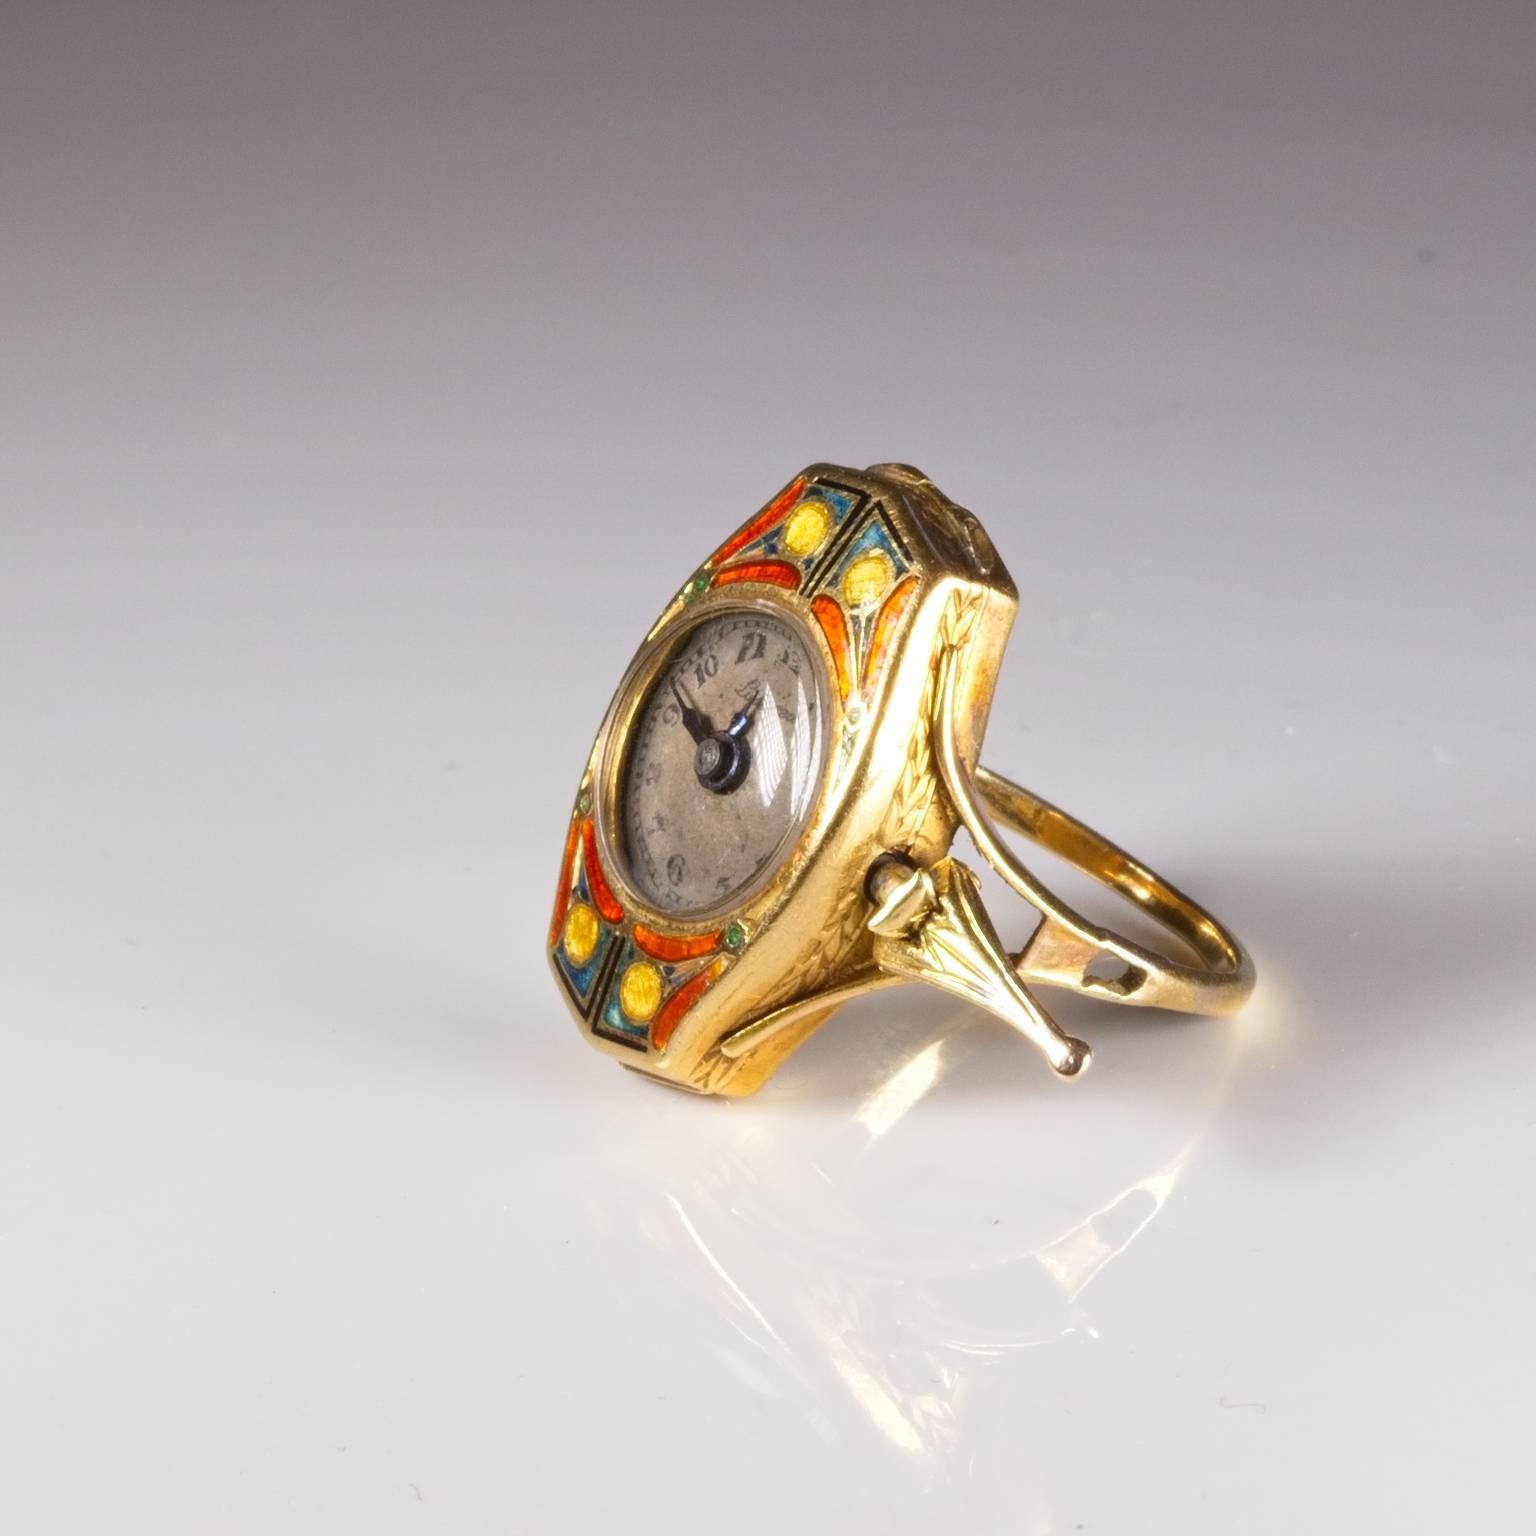 Stunning ring watch by Lusina in 18ct gold with enamelling and classic art deco styling featuring a hidden crown. Has been serviced. Currently size M (US=6) and will be safely sized by our expert jewellers free of charge if required. Engraved: From